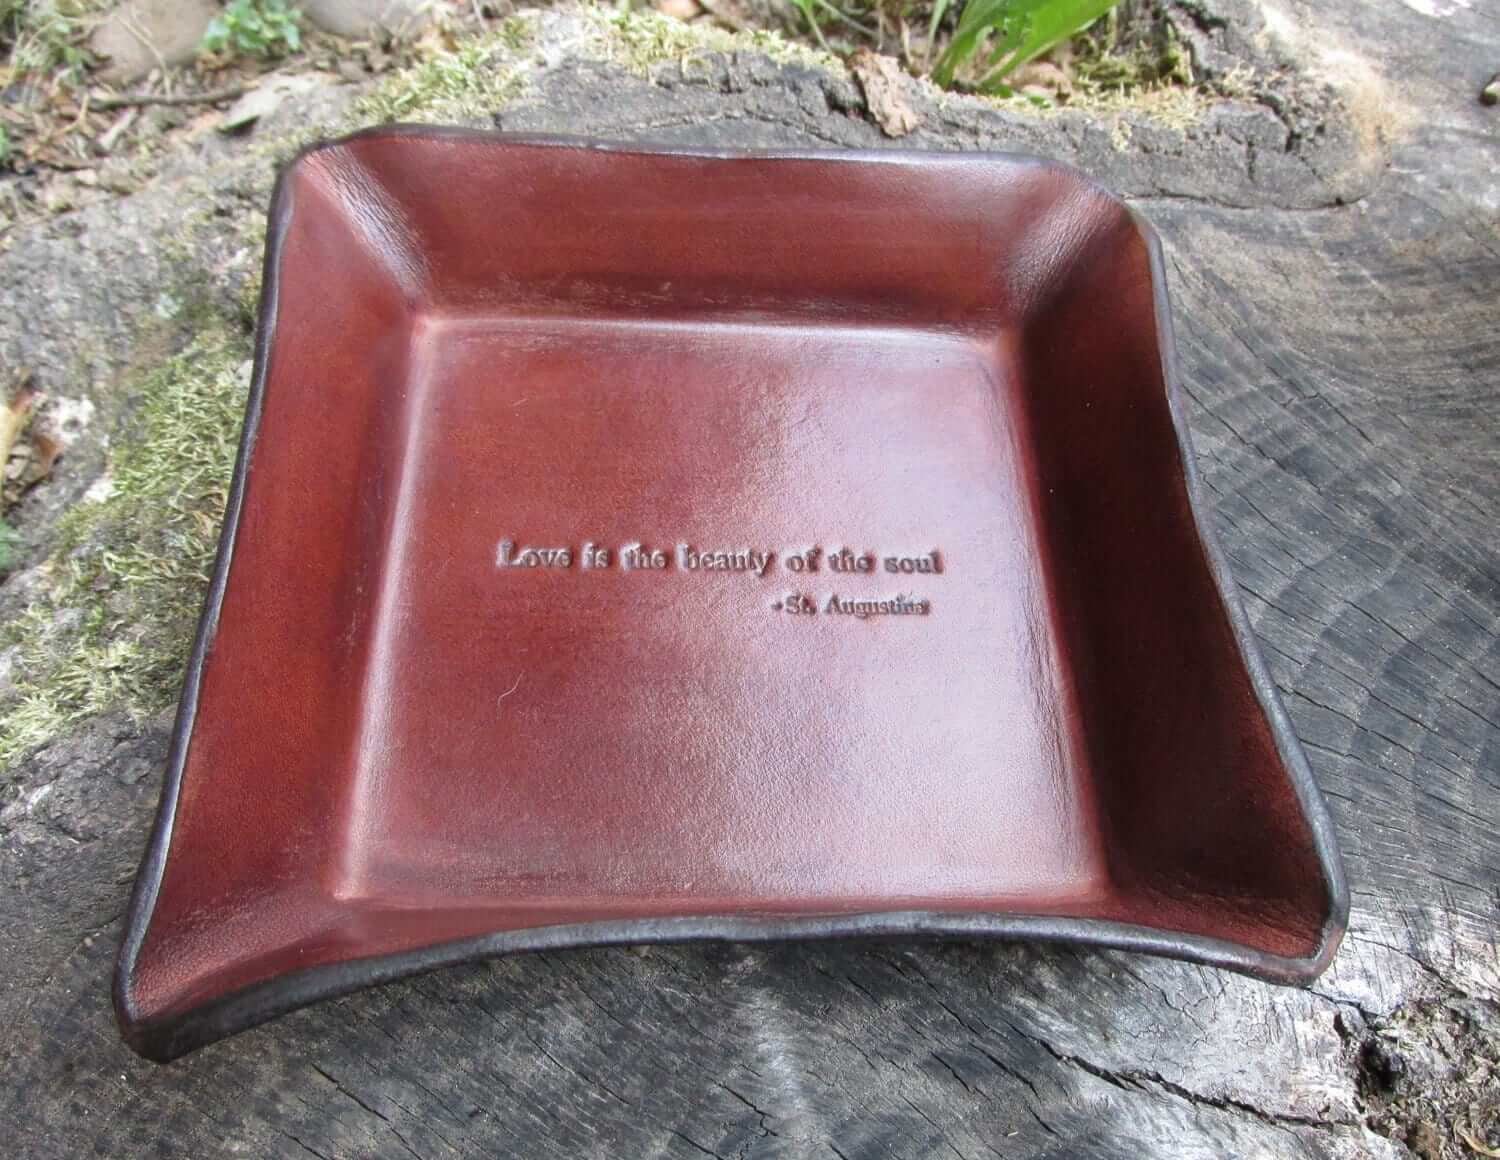 For The Love of Louis Tray